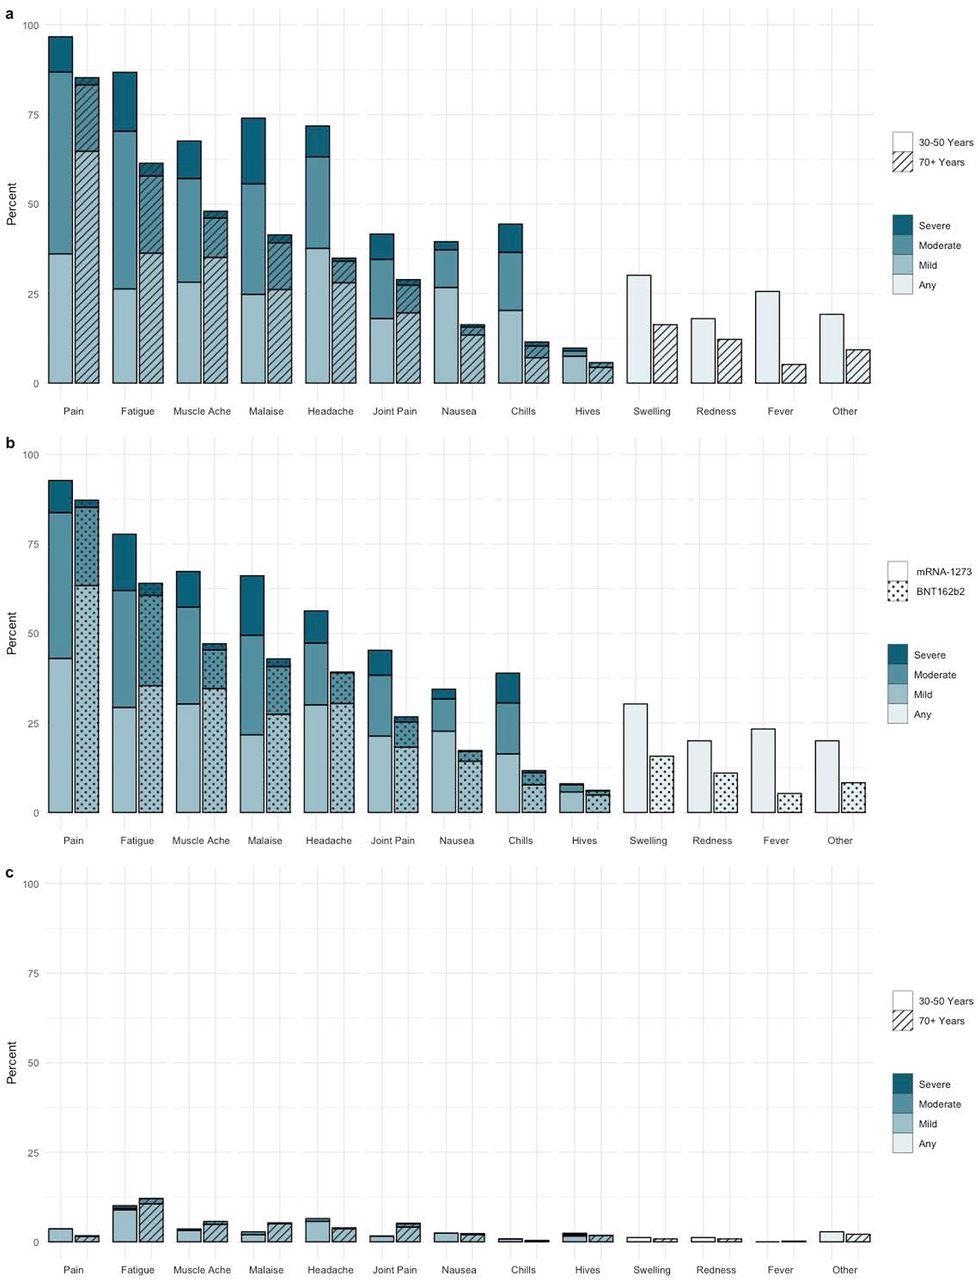 Self Reported Adverse events to Second vaccine dose a) Adverse events and reported severity during first 7 days post dose 2 by age cohort (n=955) b) Adverse Events and reported severity during first 7 days post dose 2 by vaccine type (n=938) c) Adverse Events and severity reported on day 7 post dose 2 by age cohort (n=905)